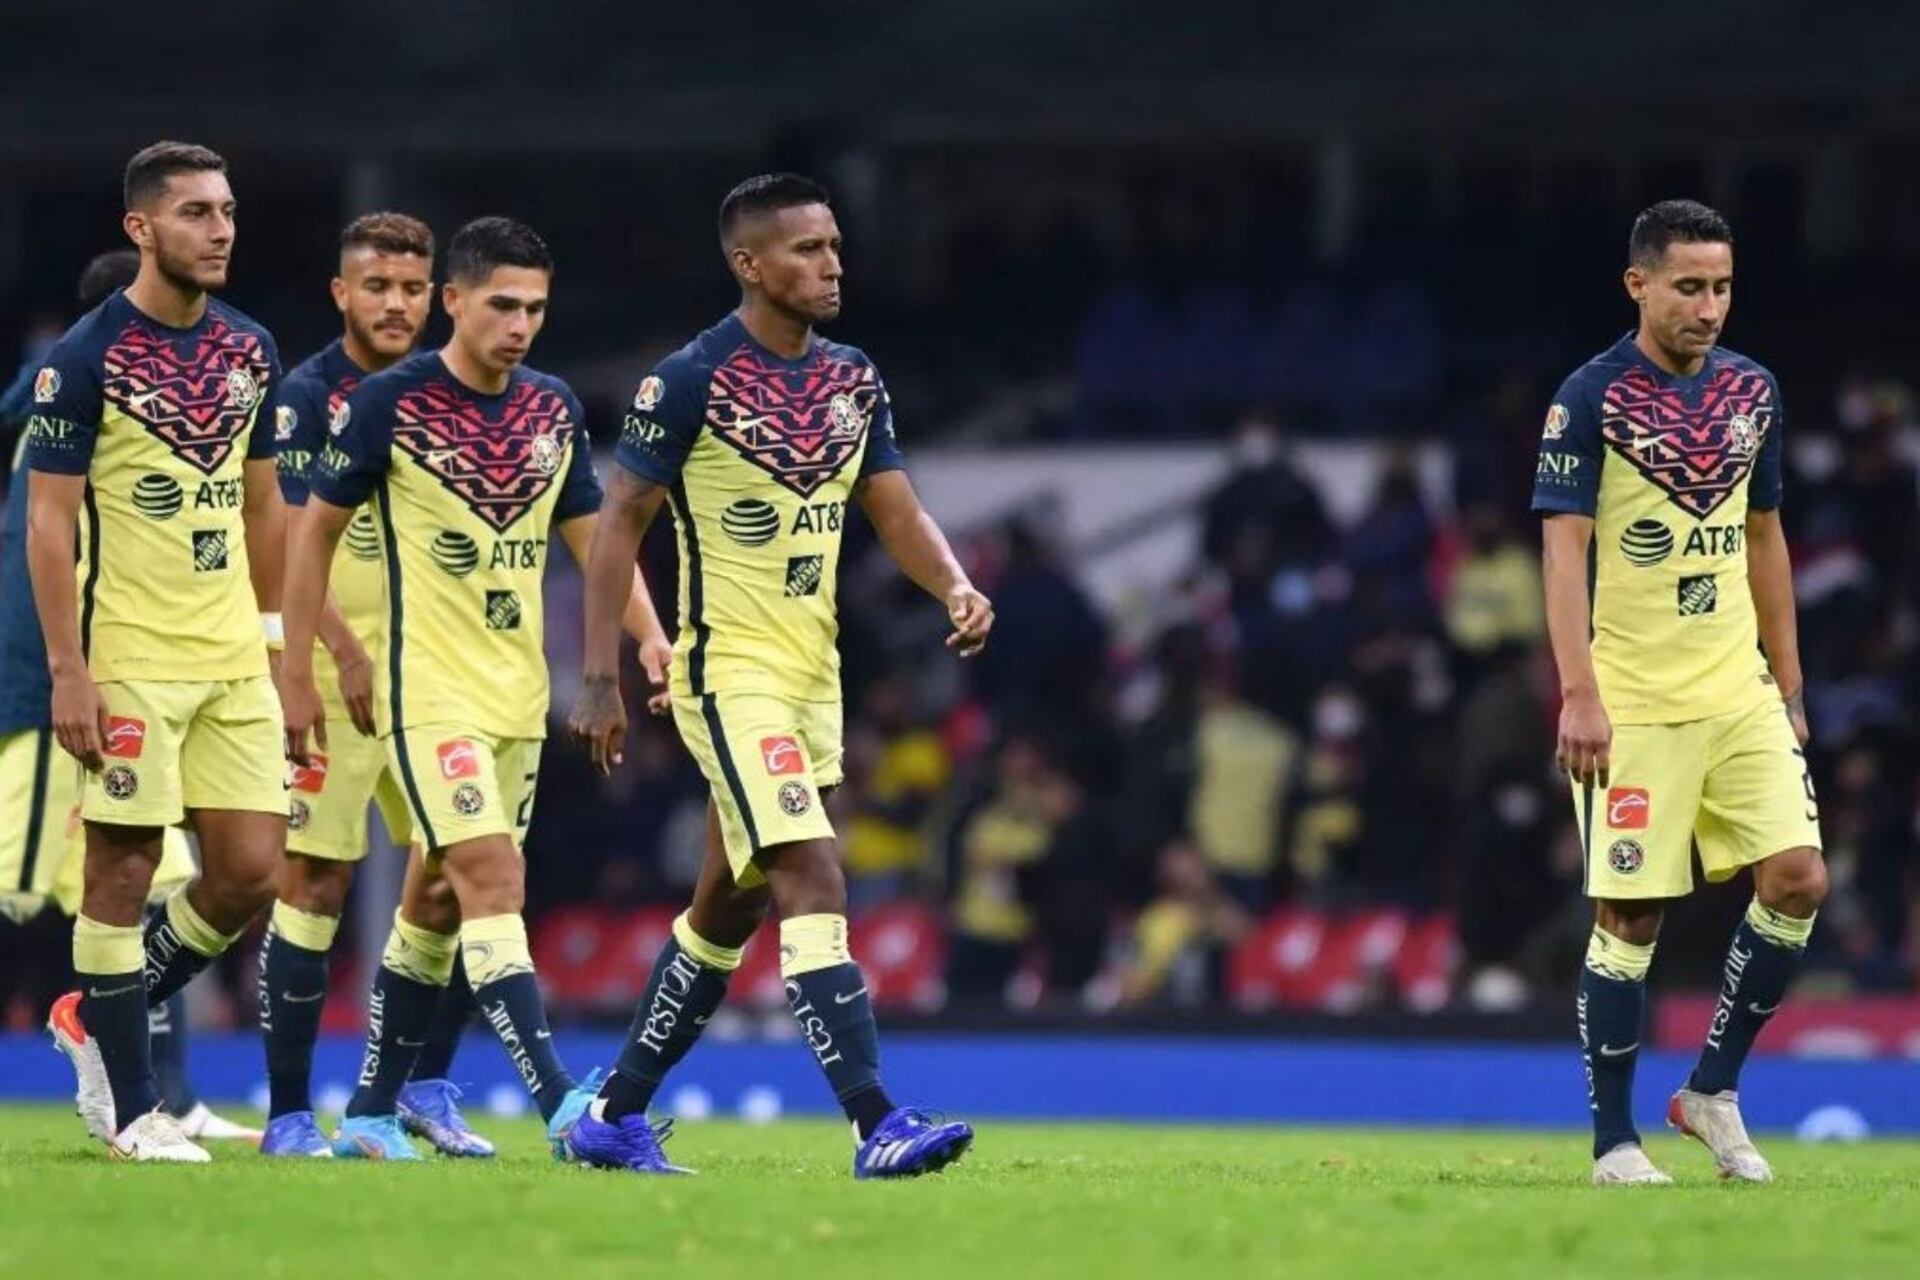 The three players who will leave Club América at the request of Emilio Azcárraga